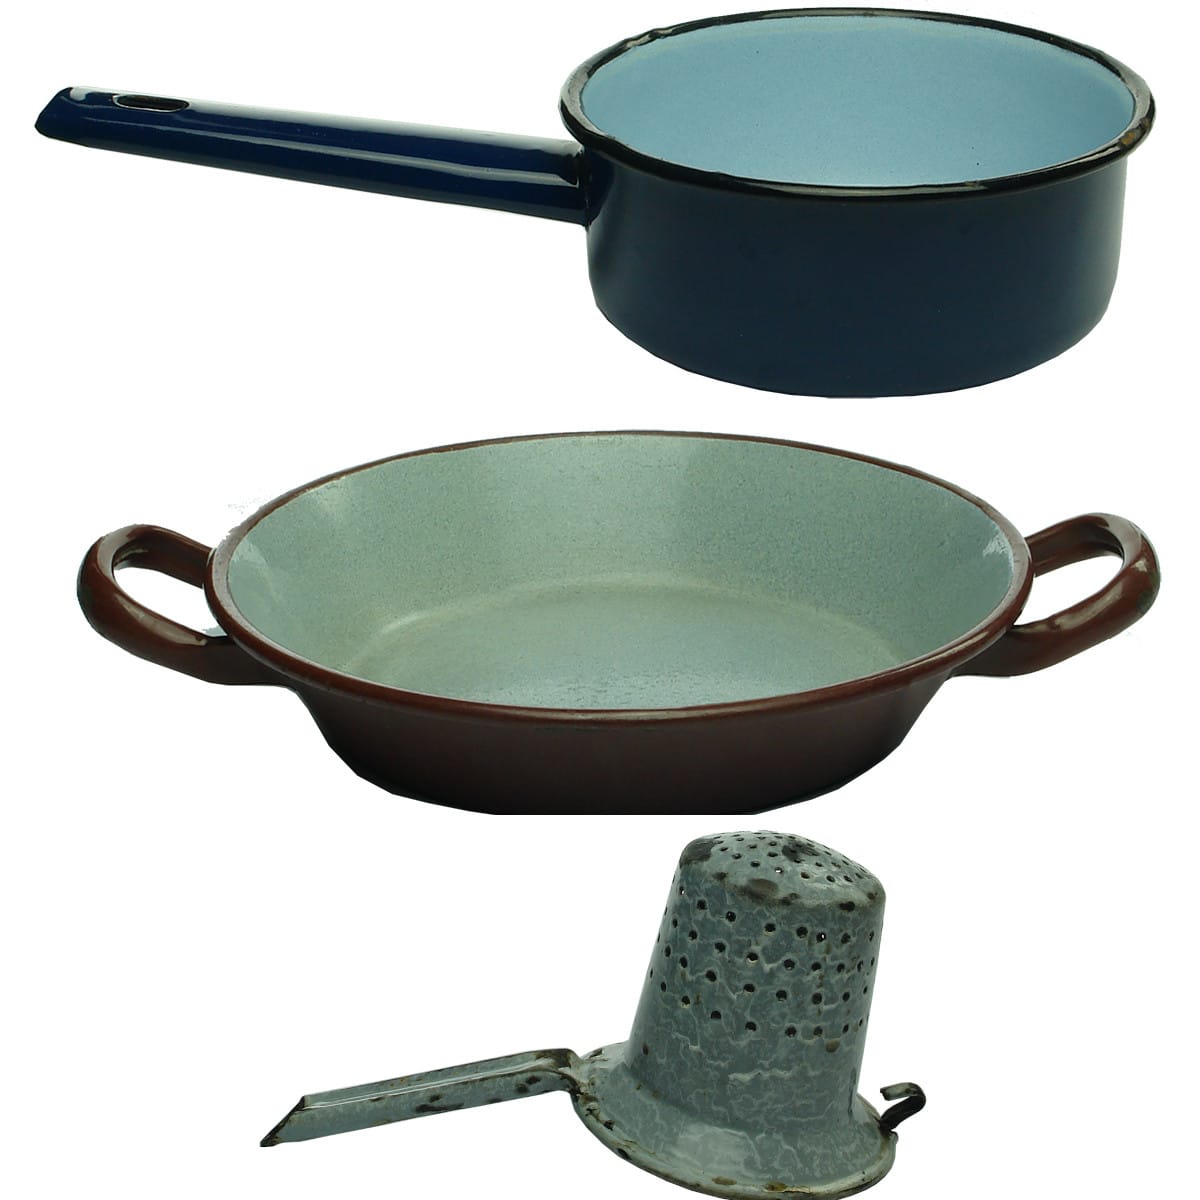 3 nice pieces of enamel ware. 2 different fry pans and a strainer.